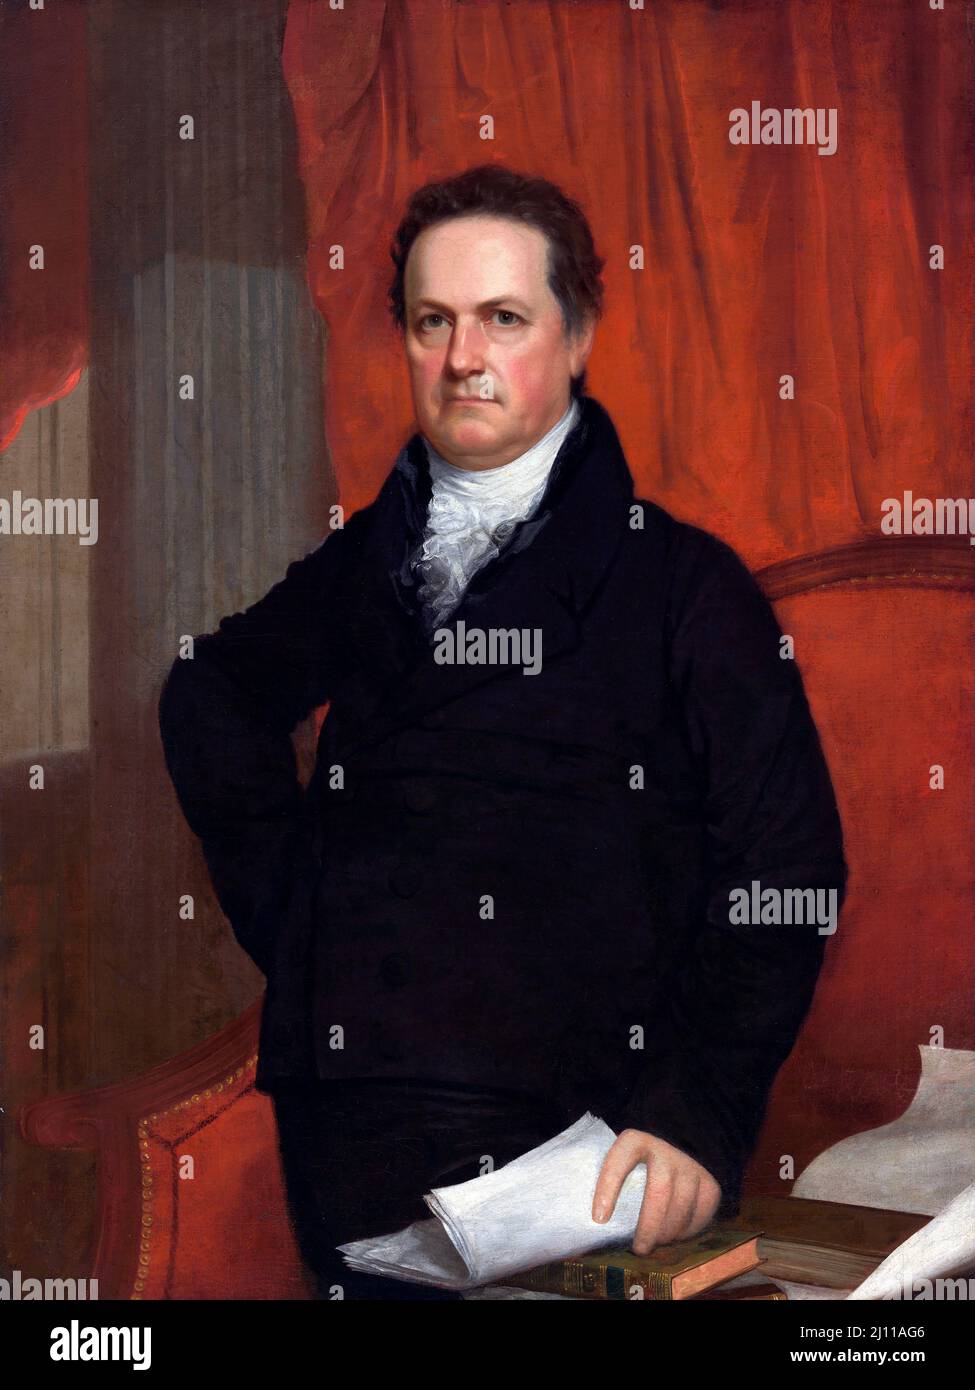 Portrait of the American politician, DeWitt Clinton (1769-1828) by john Wesley Jarvis, oil on canvas, c. 1816 Stock Photo